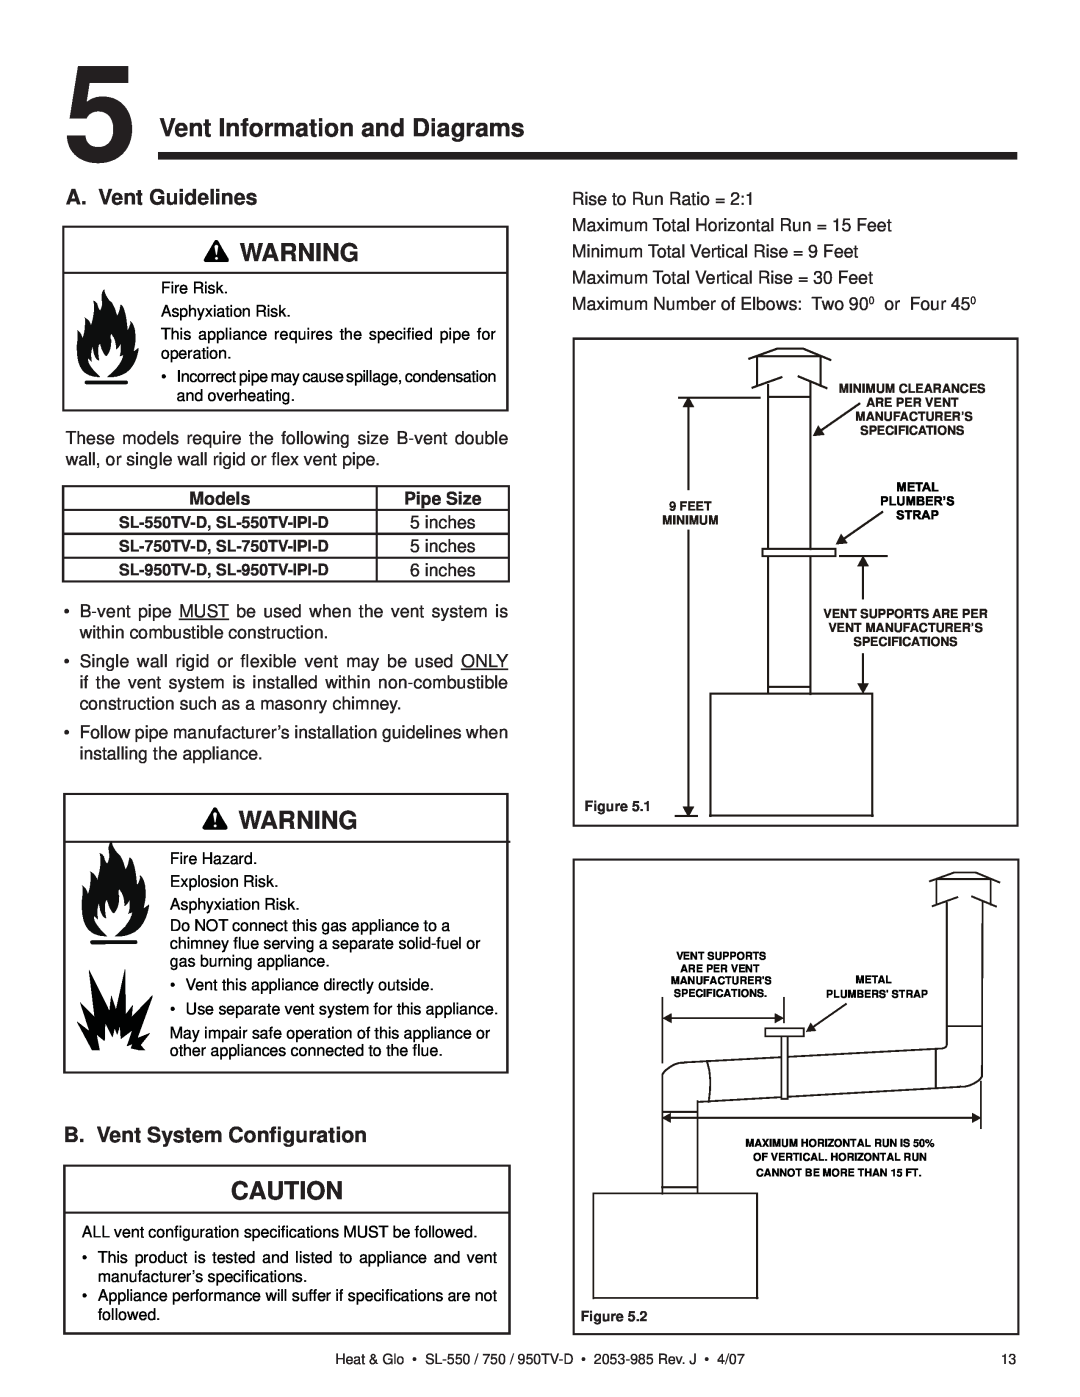 Heat & Glo LifeStyle SL-950TV-D Vent Information and Diagrams, A. Vent Guidelines, B. Vent System Conﬁguration, Models 